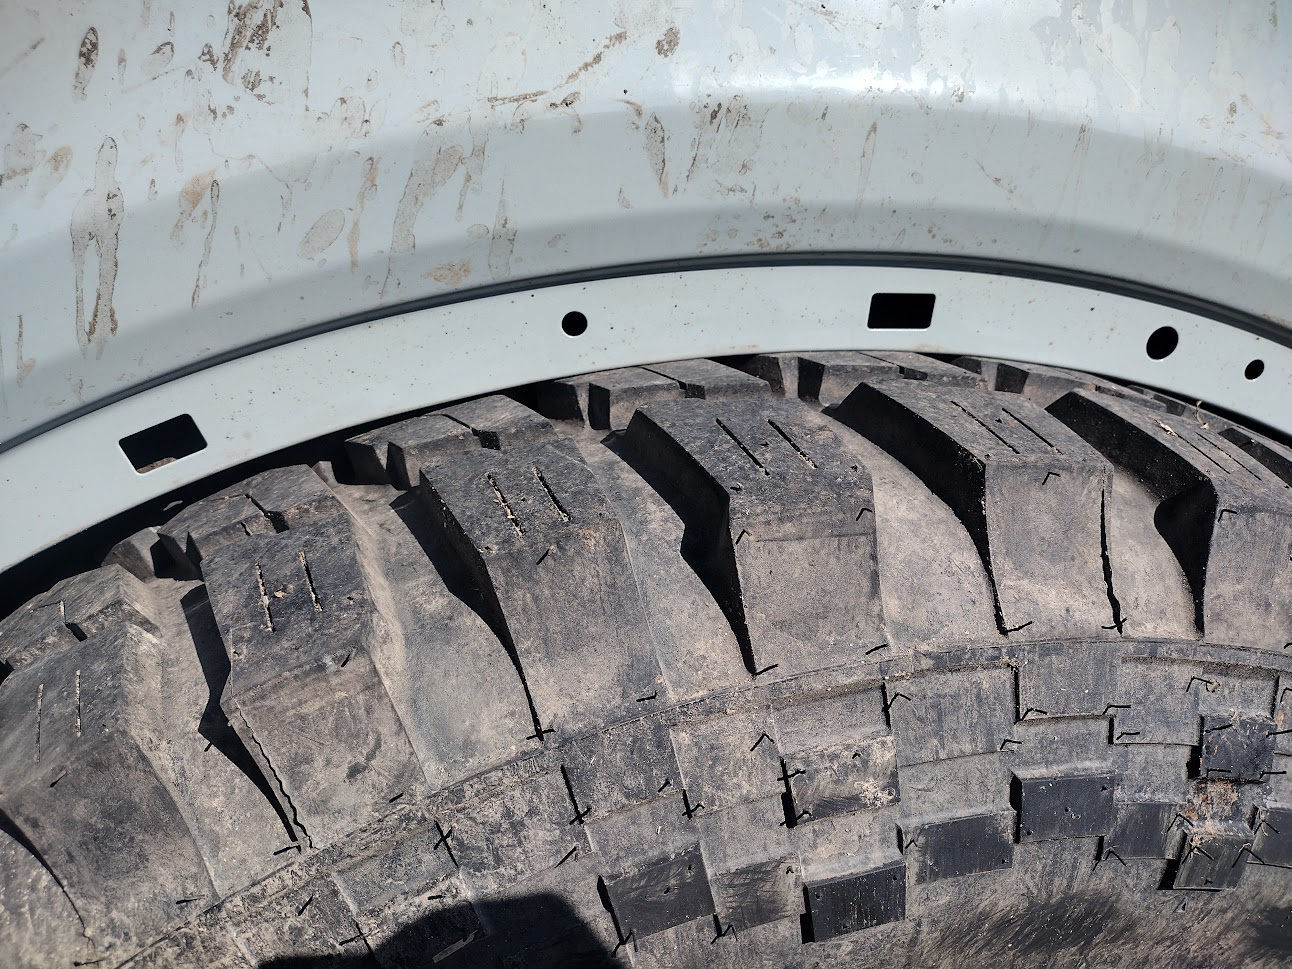 Ford Bronco 37" Tires on a Non-Sasquatch Badlands - My Experience, Results, Pics 1666477587289